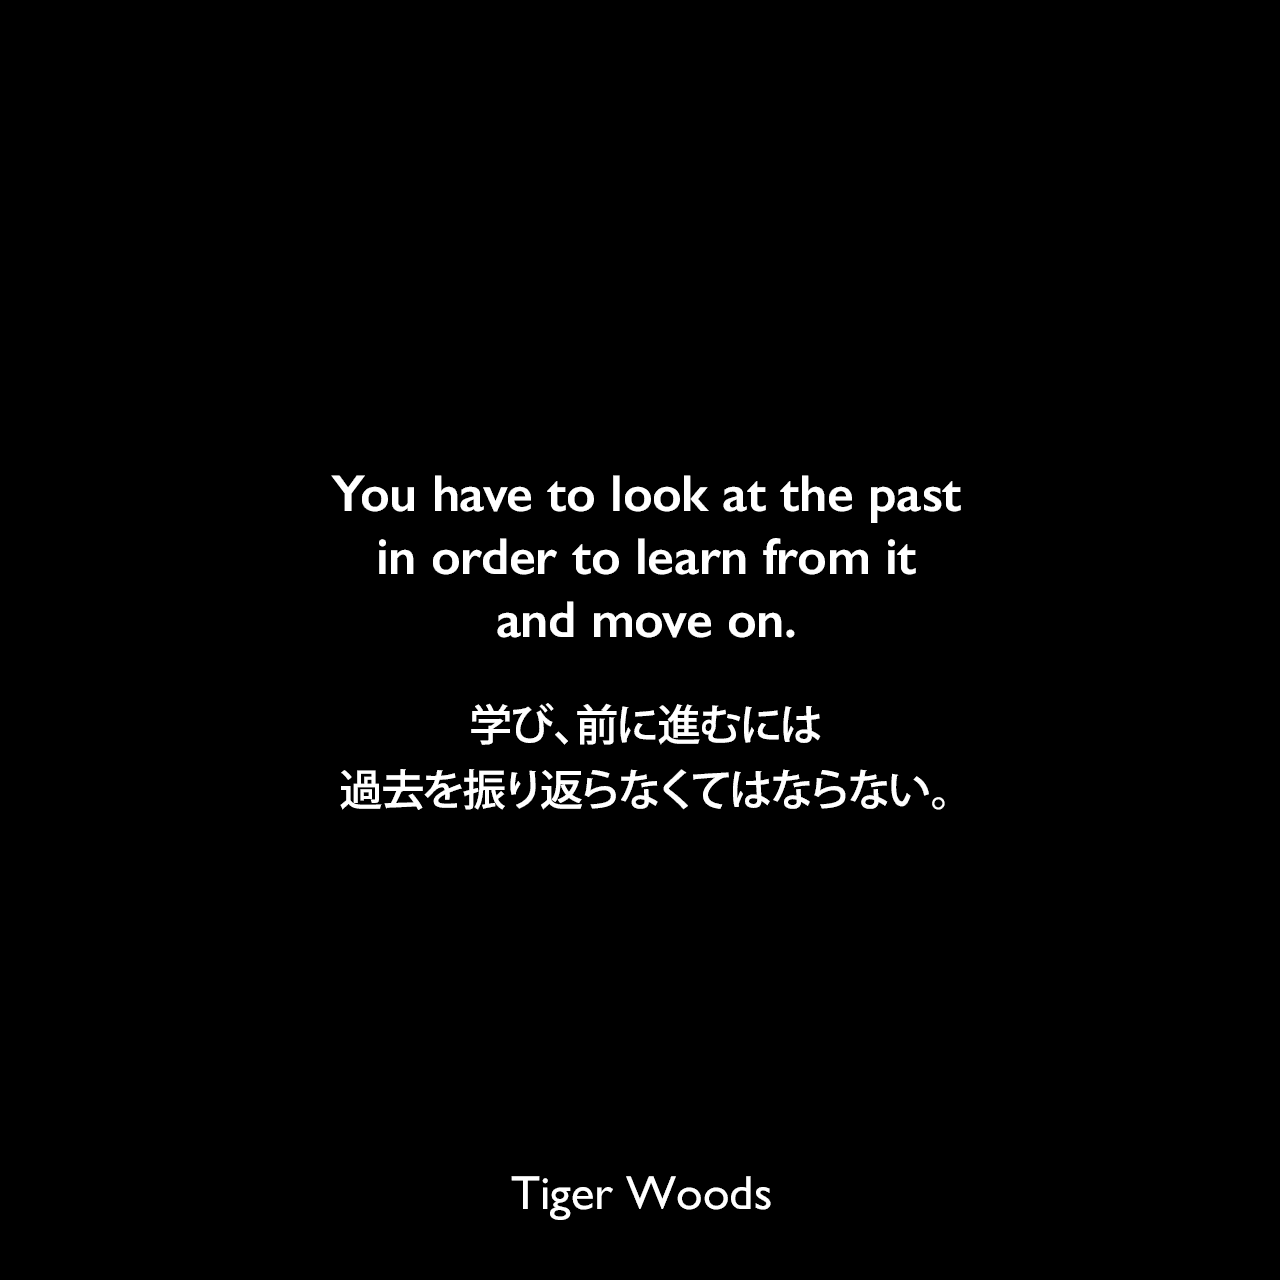 You have to look at the past in order to learn from it and move on.学び、前に進むには過去を振り返らなくてはならない。